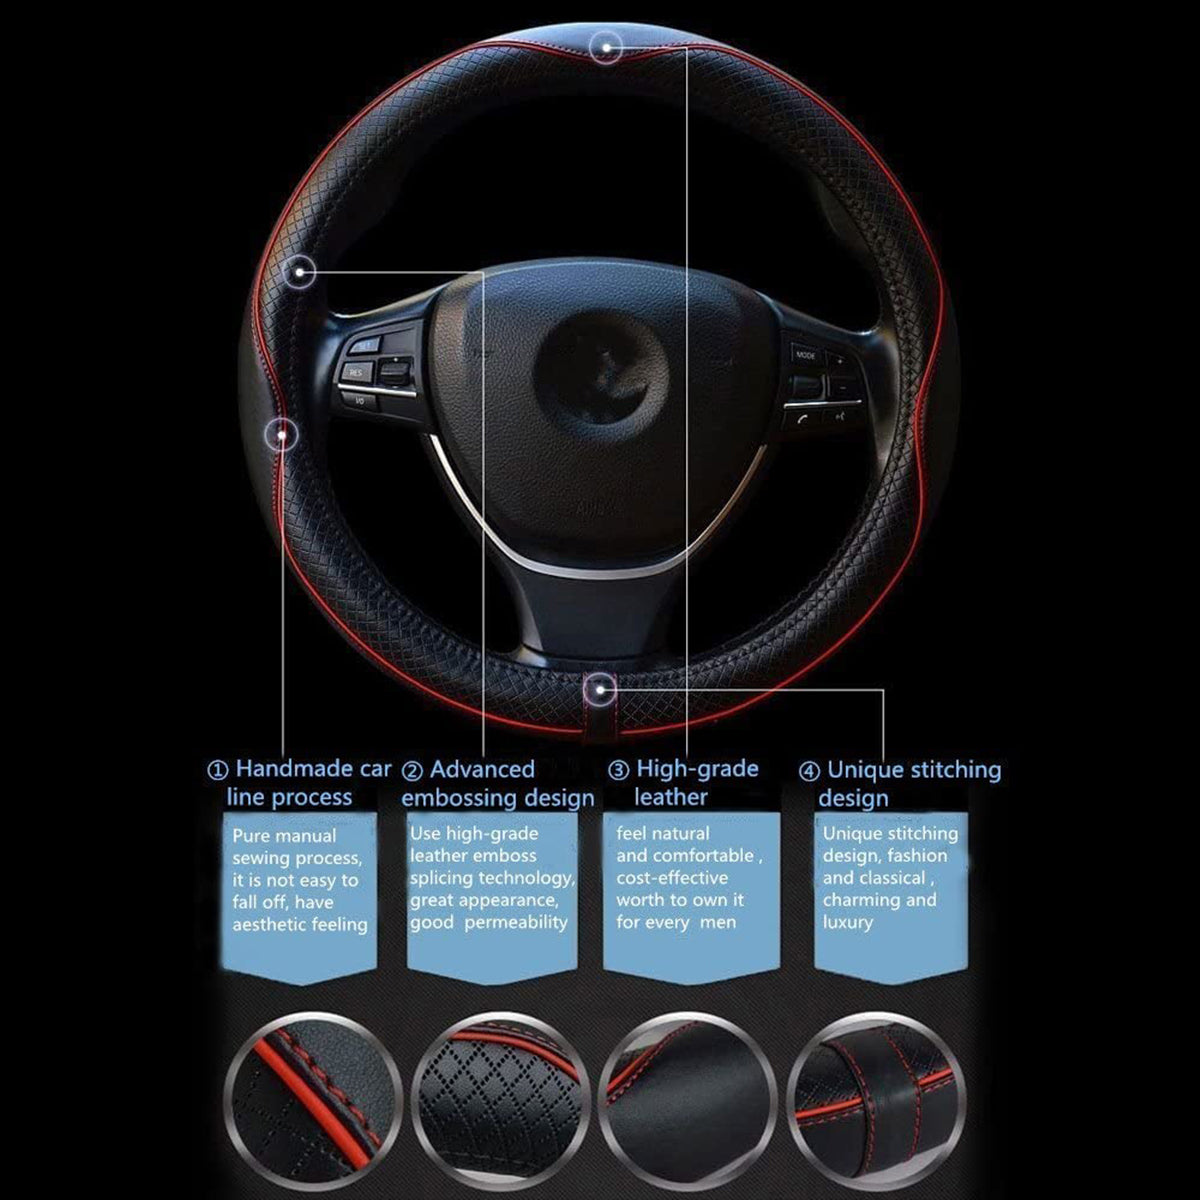 Car Steering Wheel Cover, Custom For Your Cars, Anti-Slip, Safety, Soft, Breathable, Heavy Duty, Thick, Full Surround, Sports Style, Car Accessories MC18990 - Delicate Leather